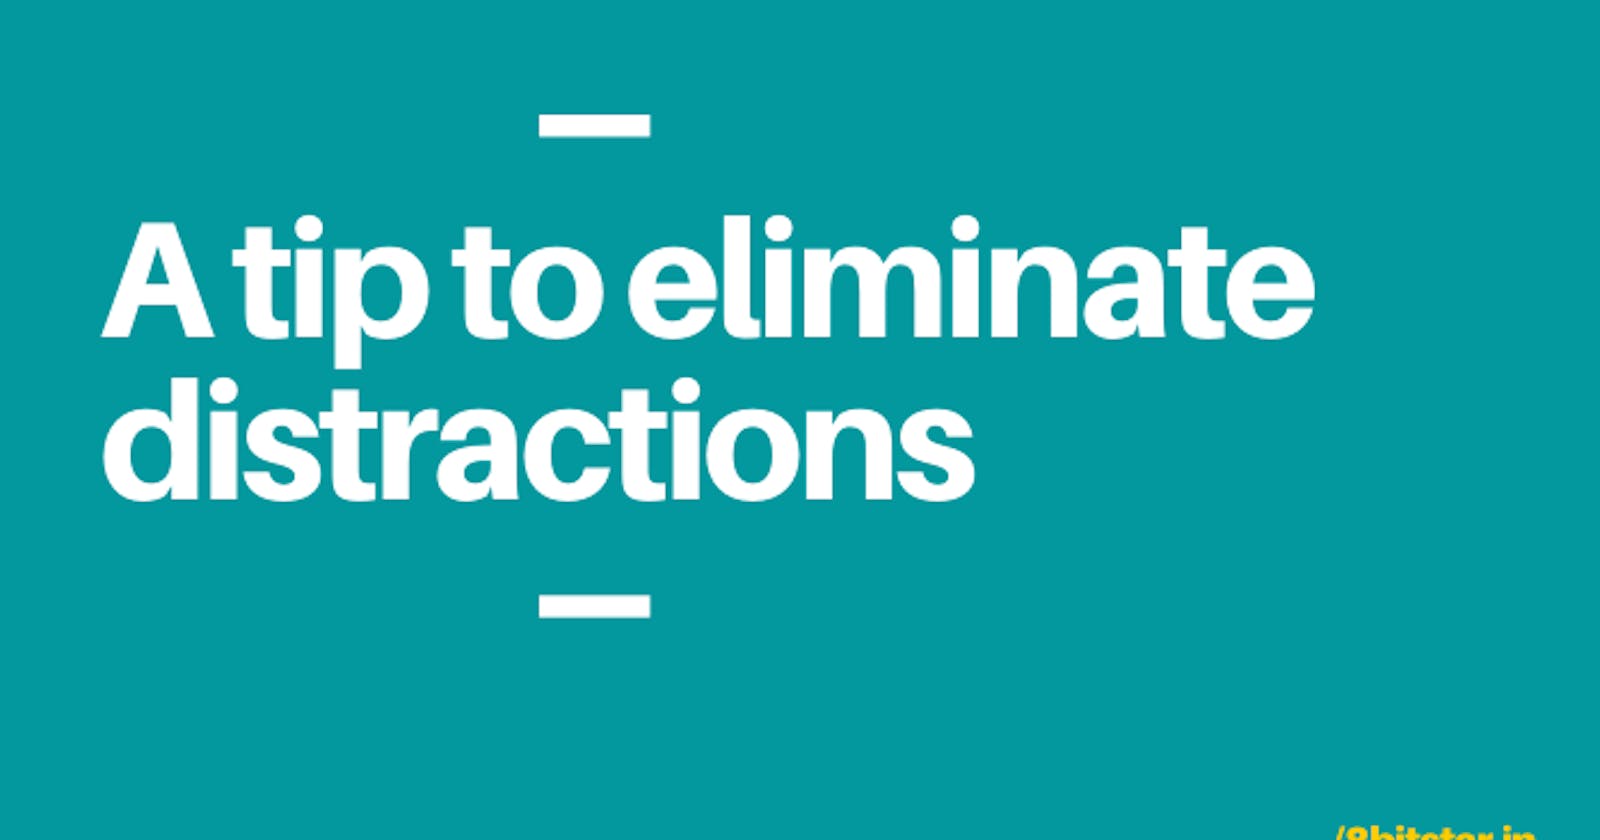 Easily get distracted while working? This one tip can be a lifesaver.